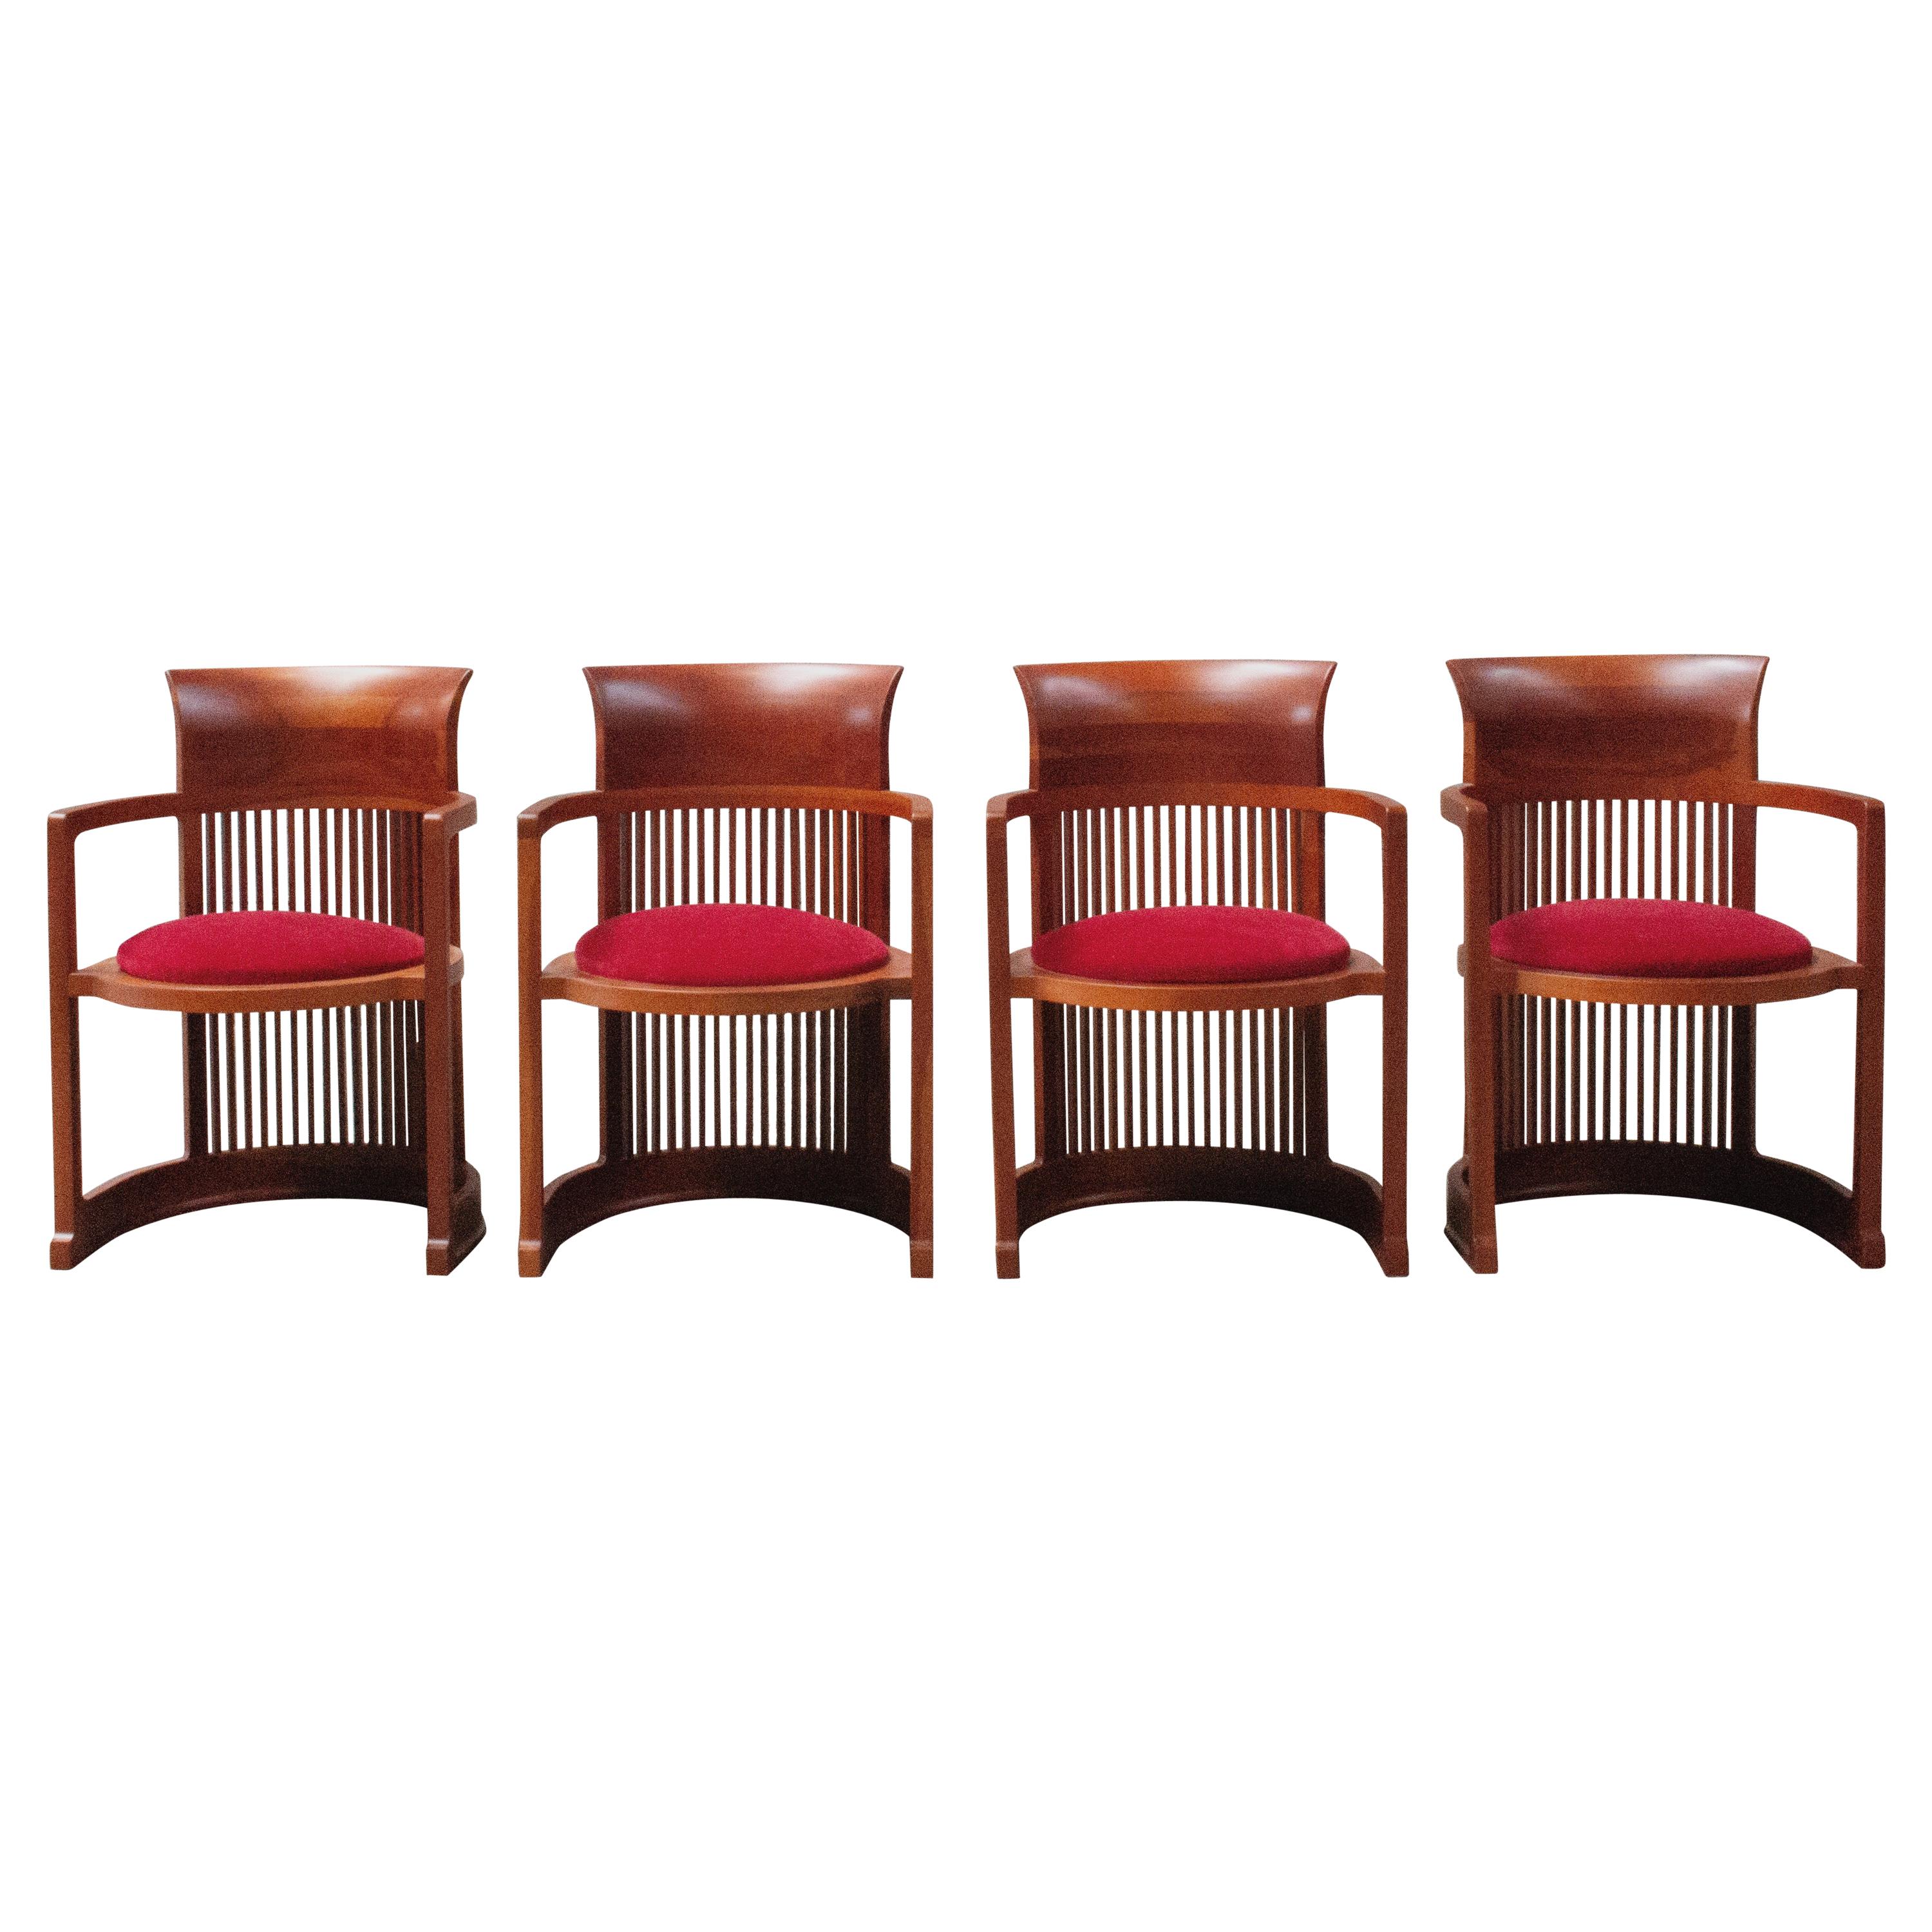 Frank Lloyd Wright "Barrel" Chairs for Cassina, 1937, Set of 4